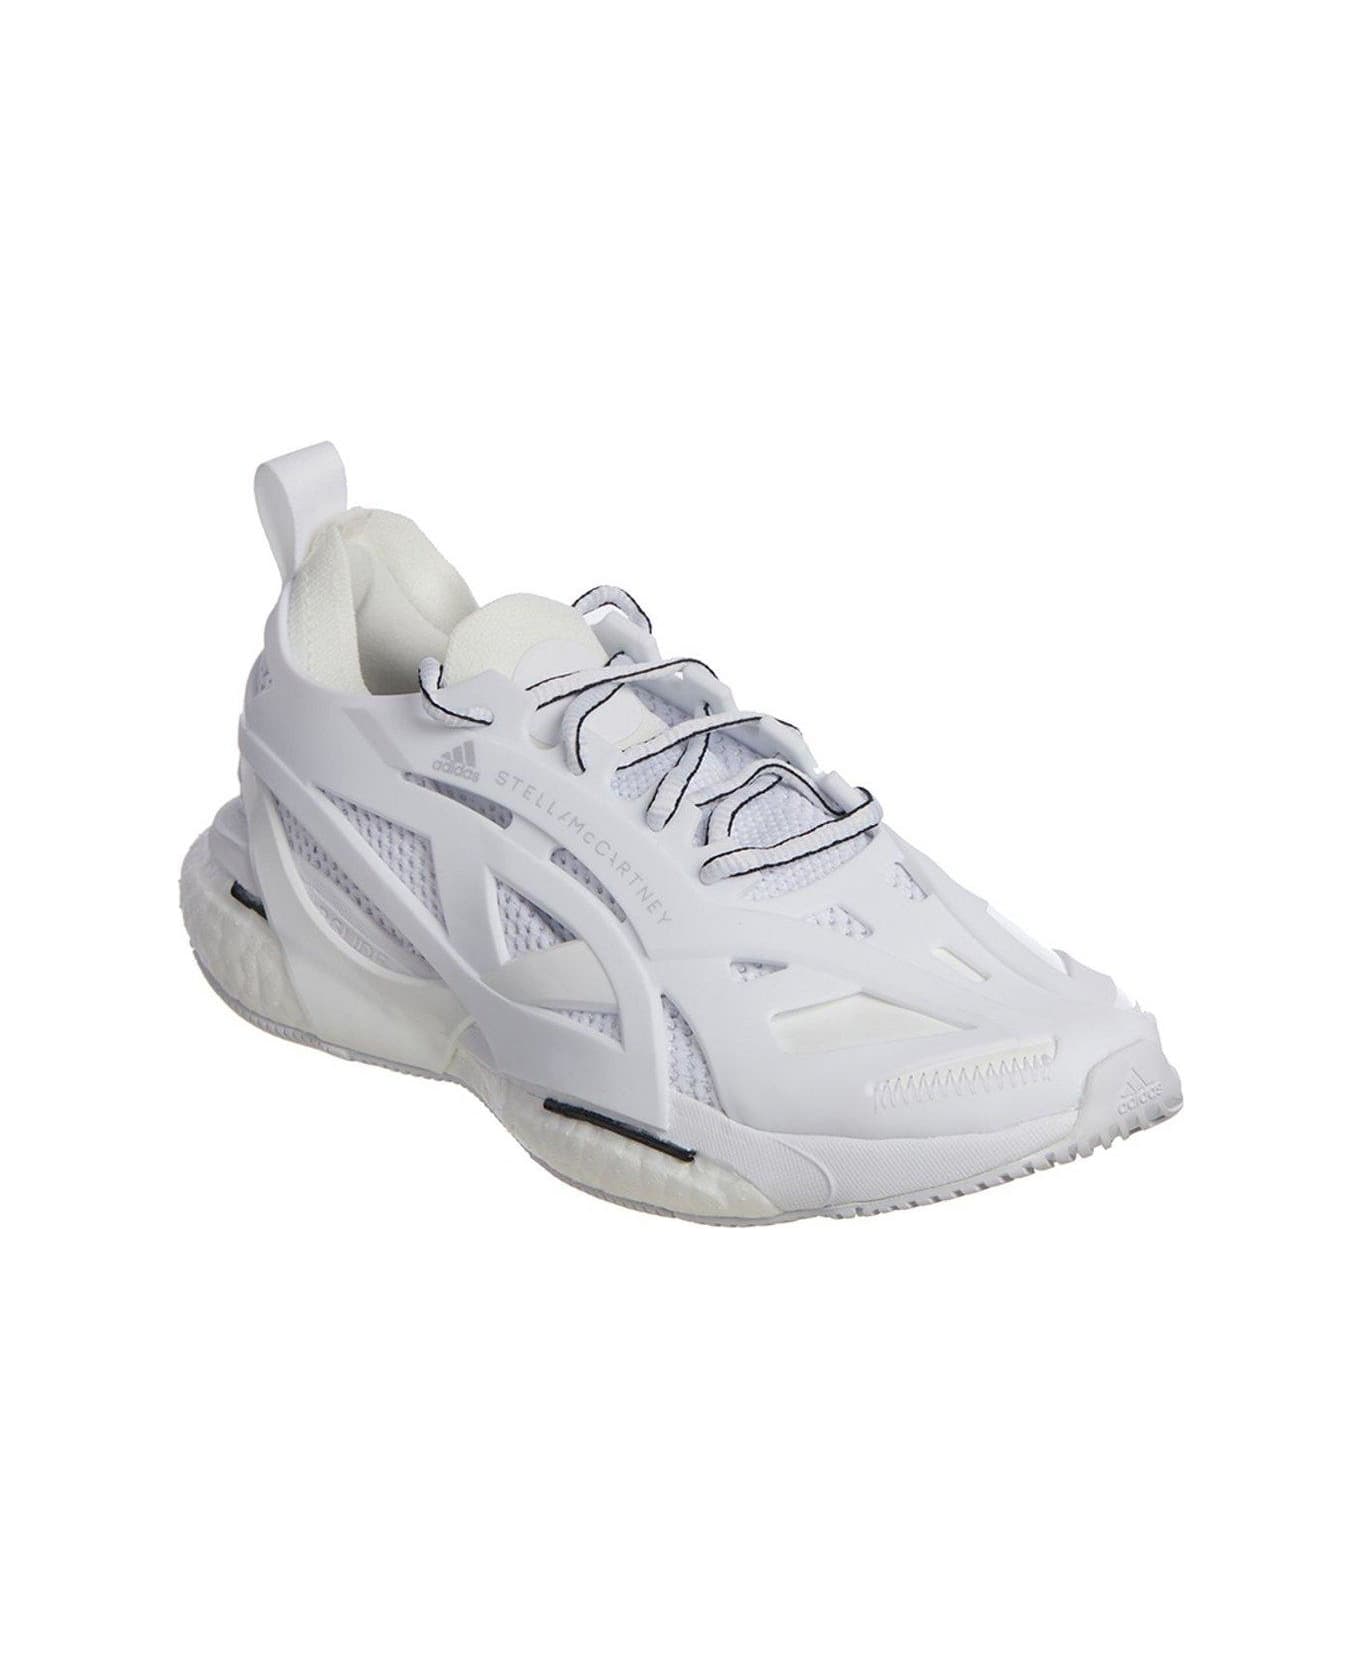 Adidas by Stella McCartney Solarglide Sneakers - WHITE スニーカー